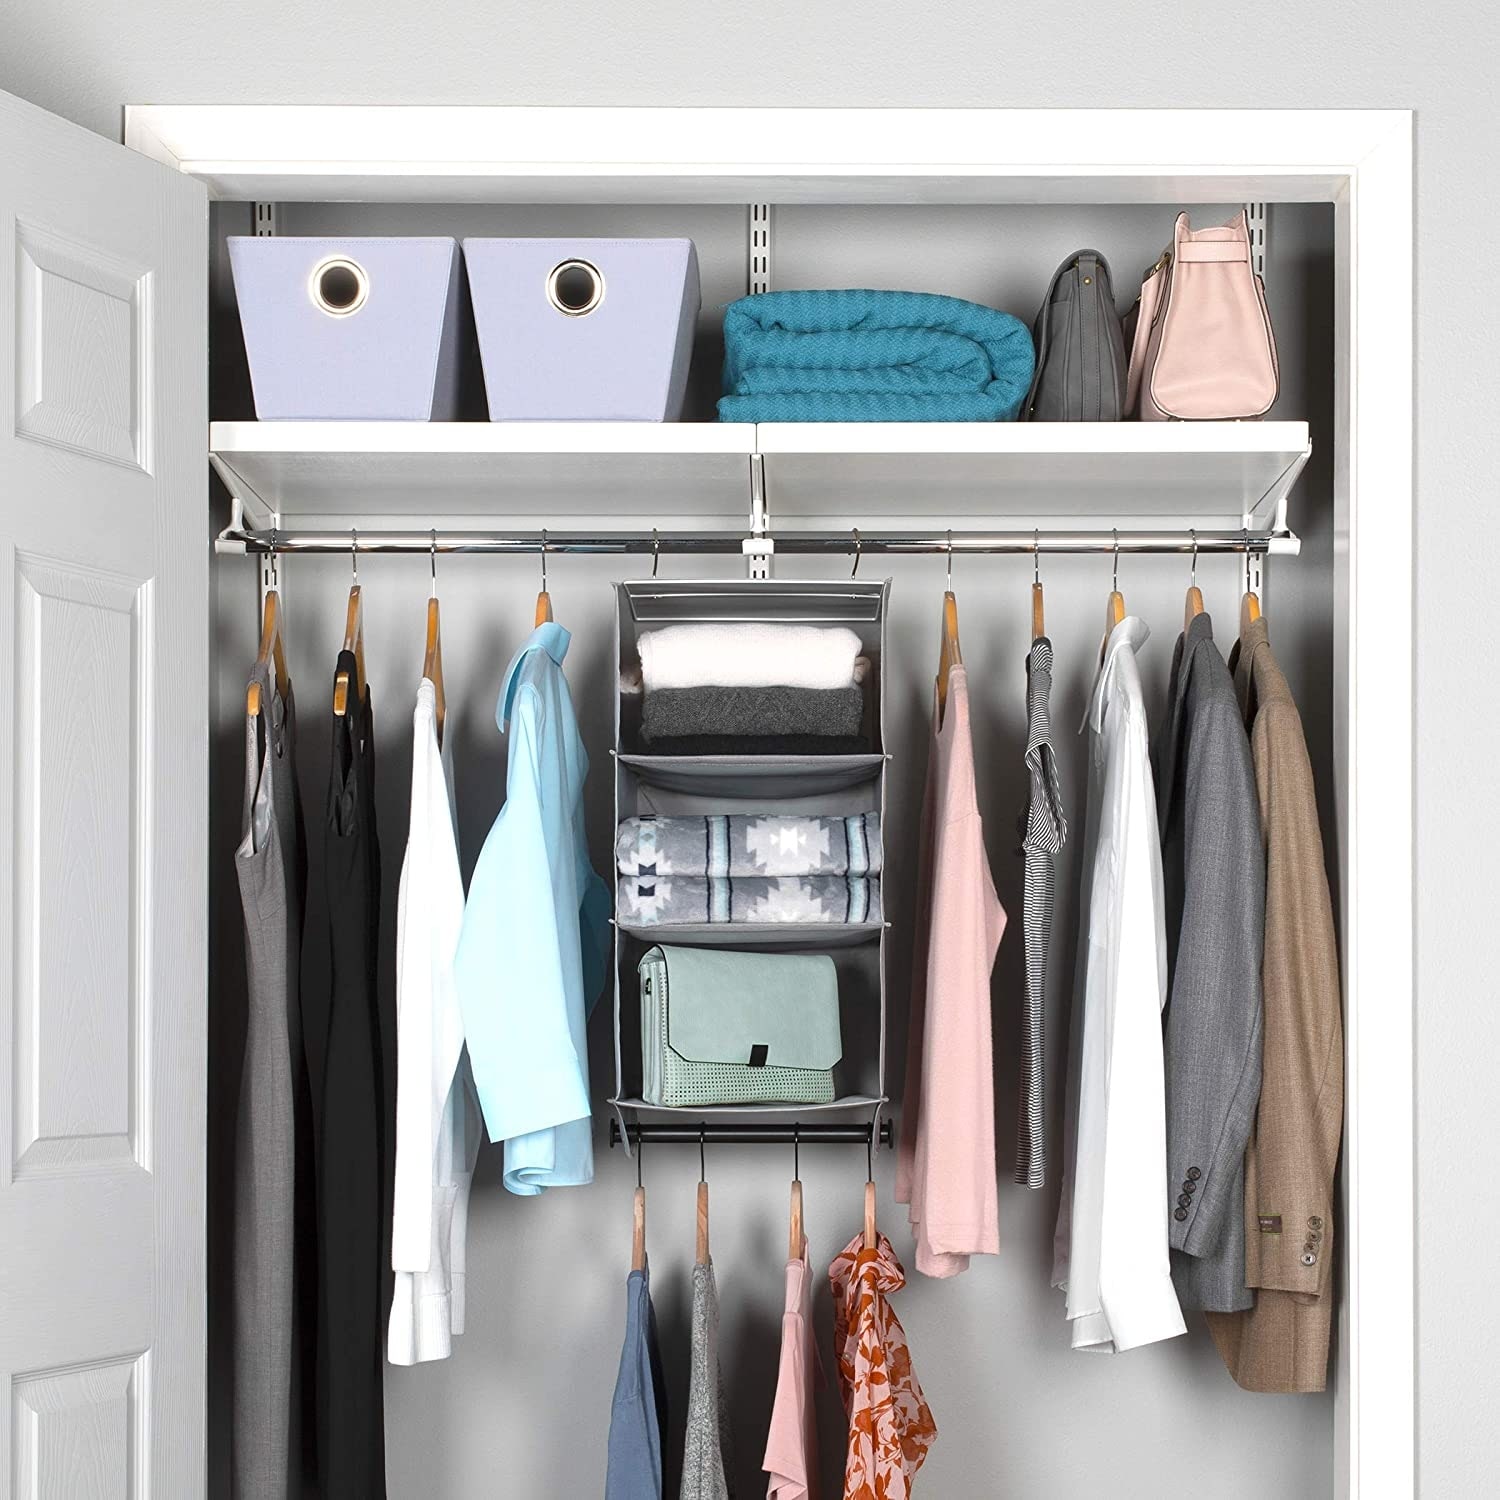 https://ak1.ostkcdn.com/images/products/is/images/direct/a852a0a5011591c7ca6c6765c60b5bf07324e19a/Hanging-Closet-Organizers-with-3-Shelves---Closet-Storage-and-RV-Closet-Organizer---Grey---Black.jpg